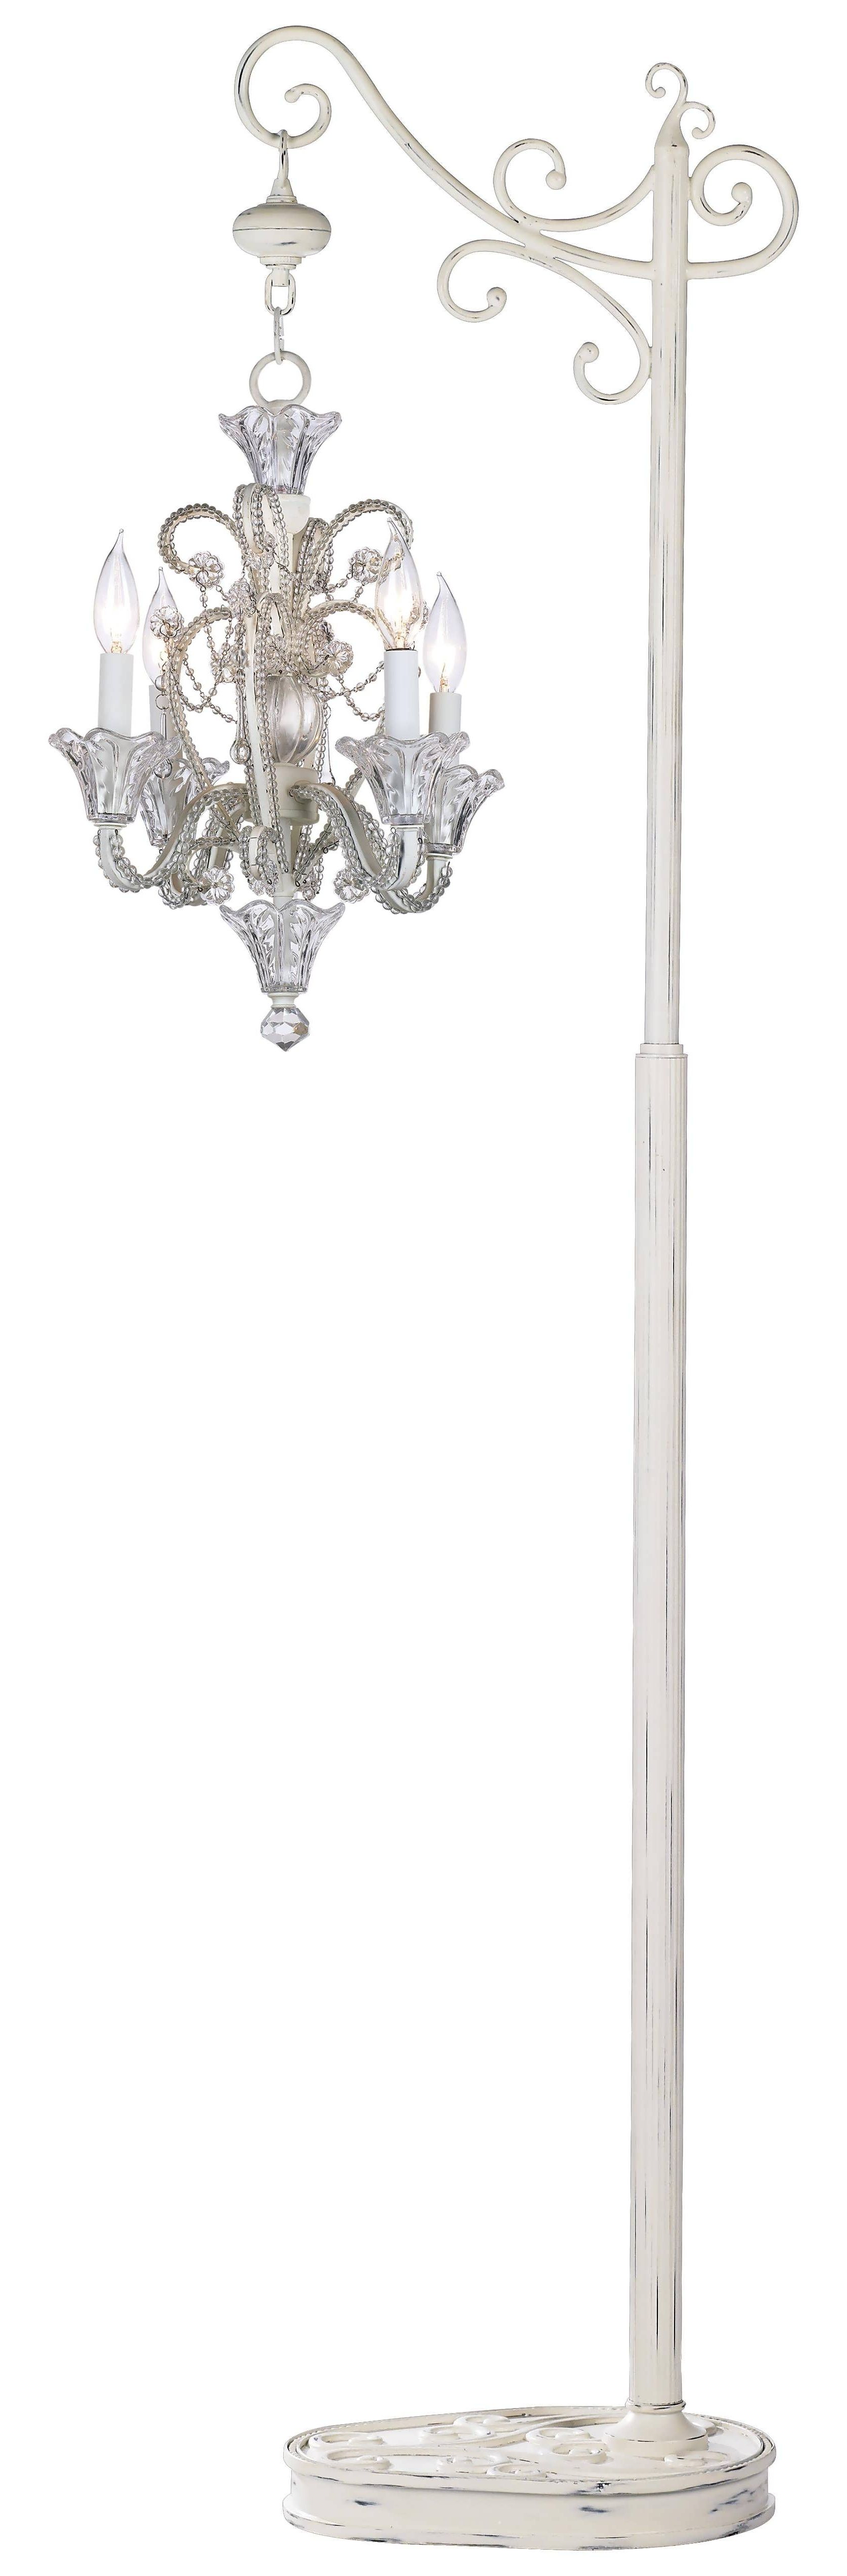 Light : Chandelier Lamp Shades Ceiling Light Fixture Rectangular Throughout Famous Tall Standing Chandelier Lamps (Photo 1 of 15)